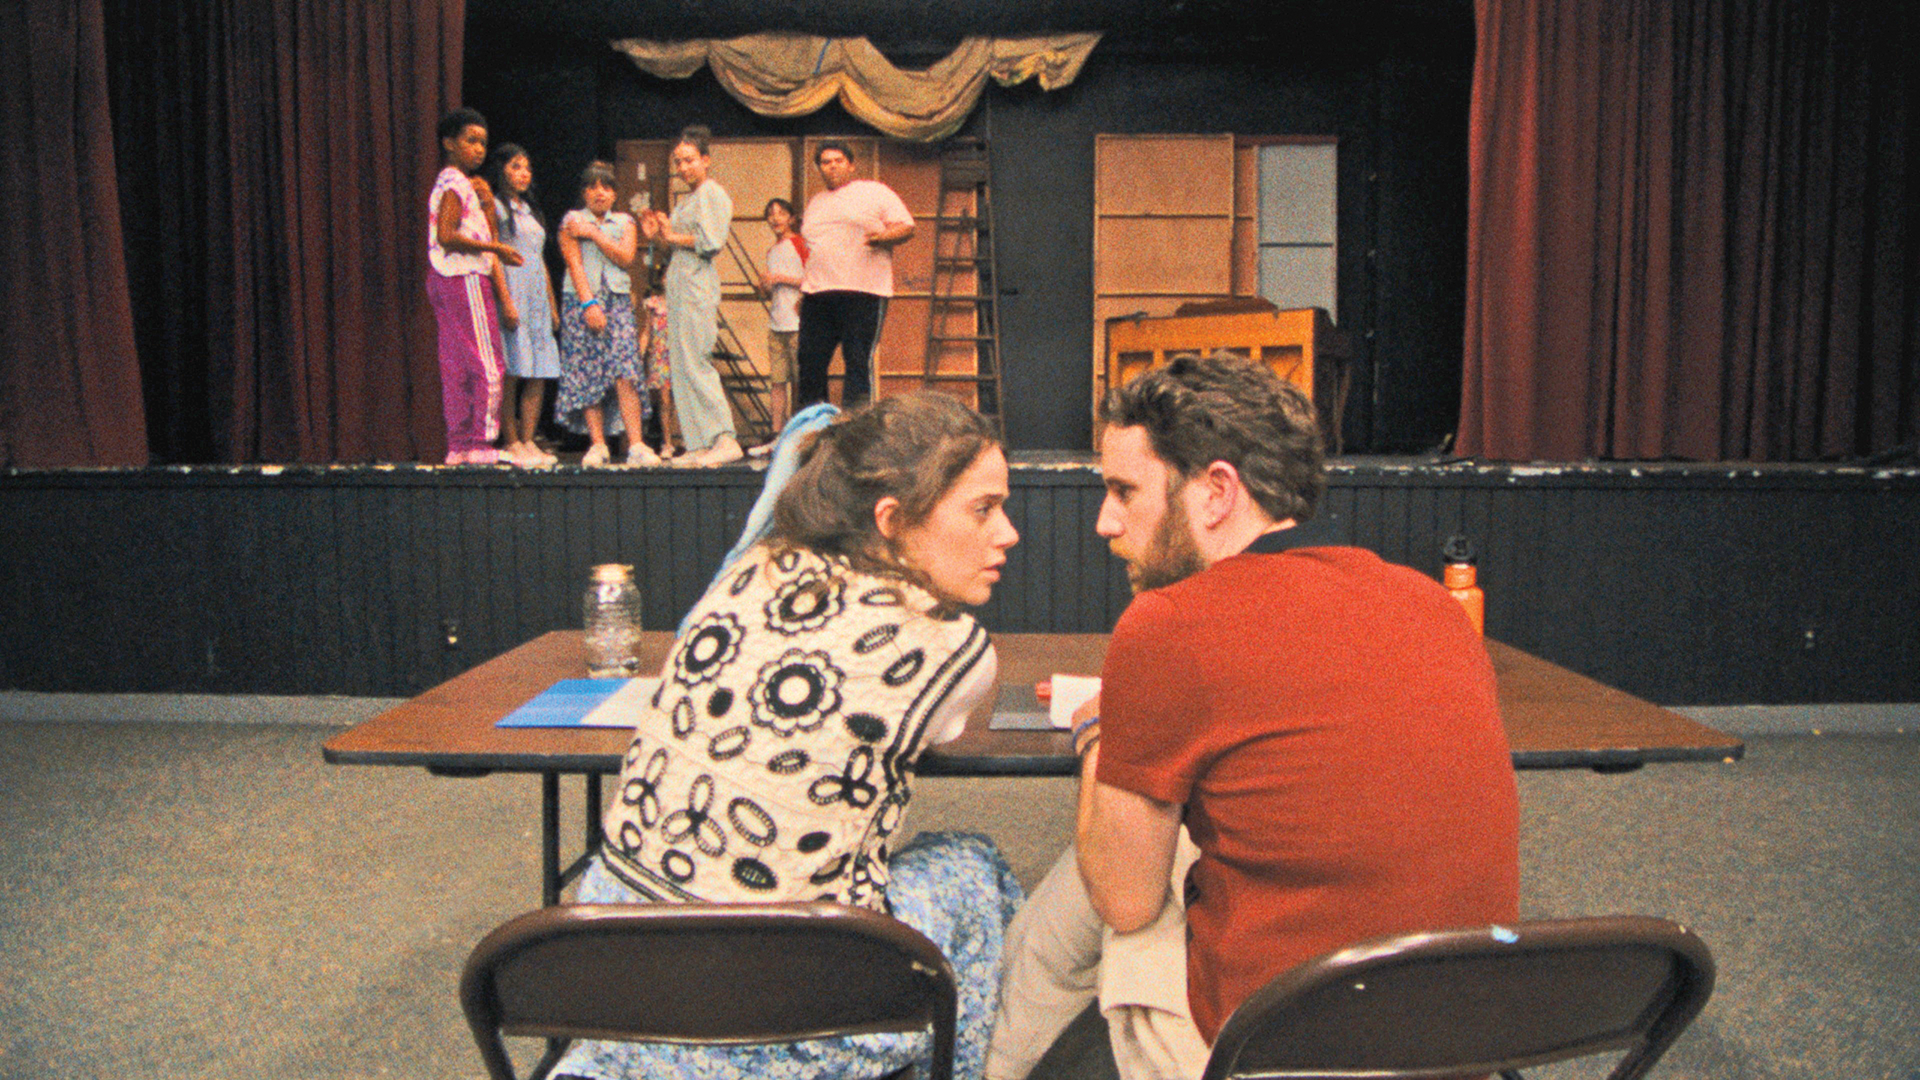 A young girl with brown hair talks to a young man with brown hair and an orange shirt. A stage is in the backround with theatre campgoers looking on